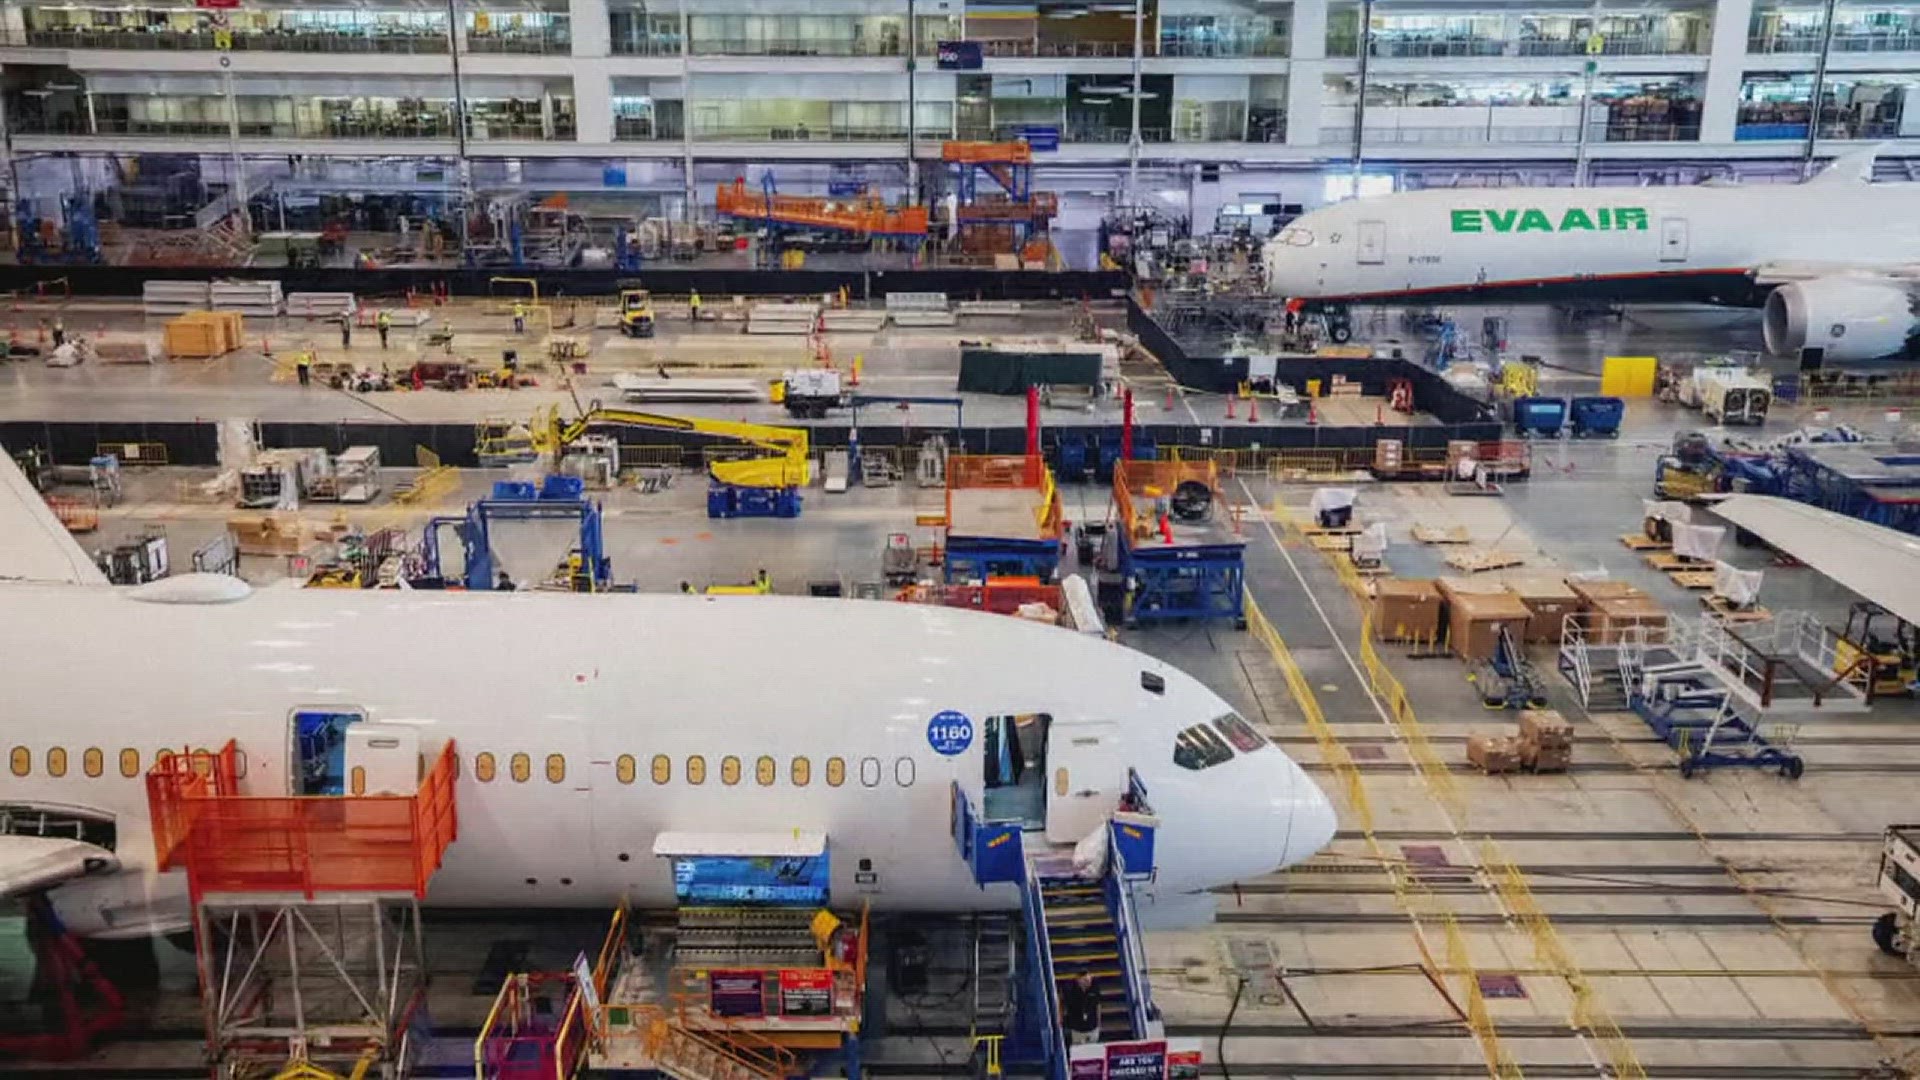 A Boeing engineer is set to testify in front of the senate on capitol hill to address the safety and quality of Boeing’s commercial jets after recent plane issues.